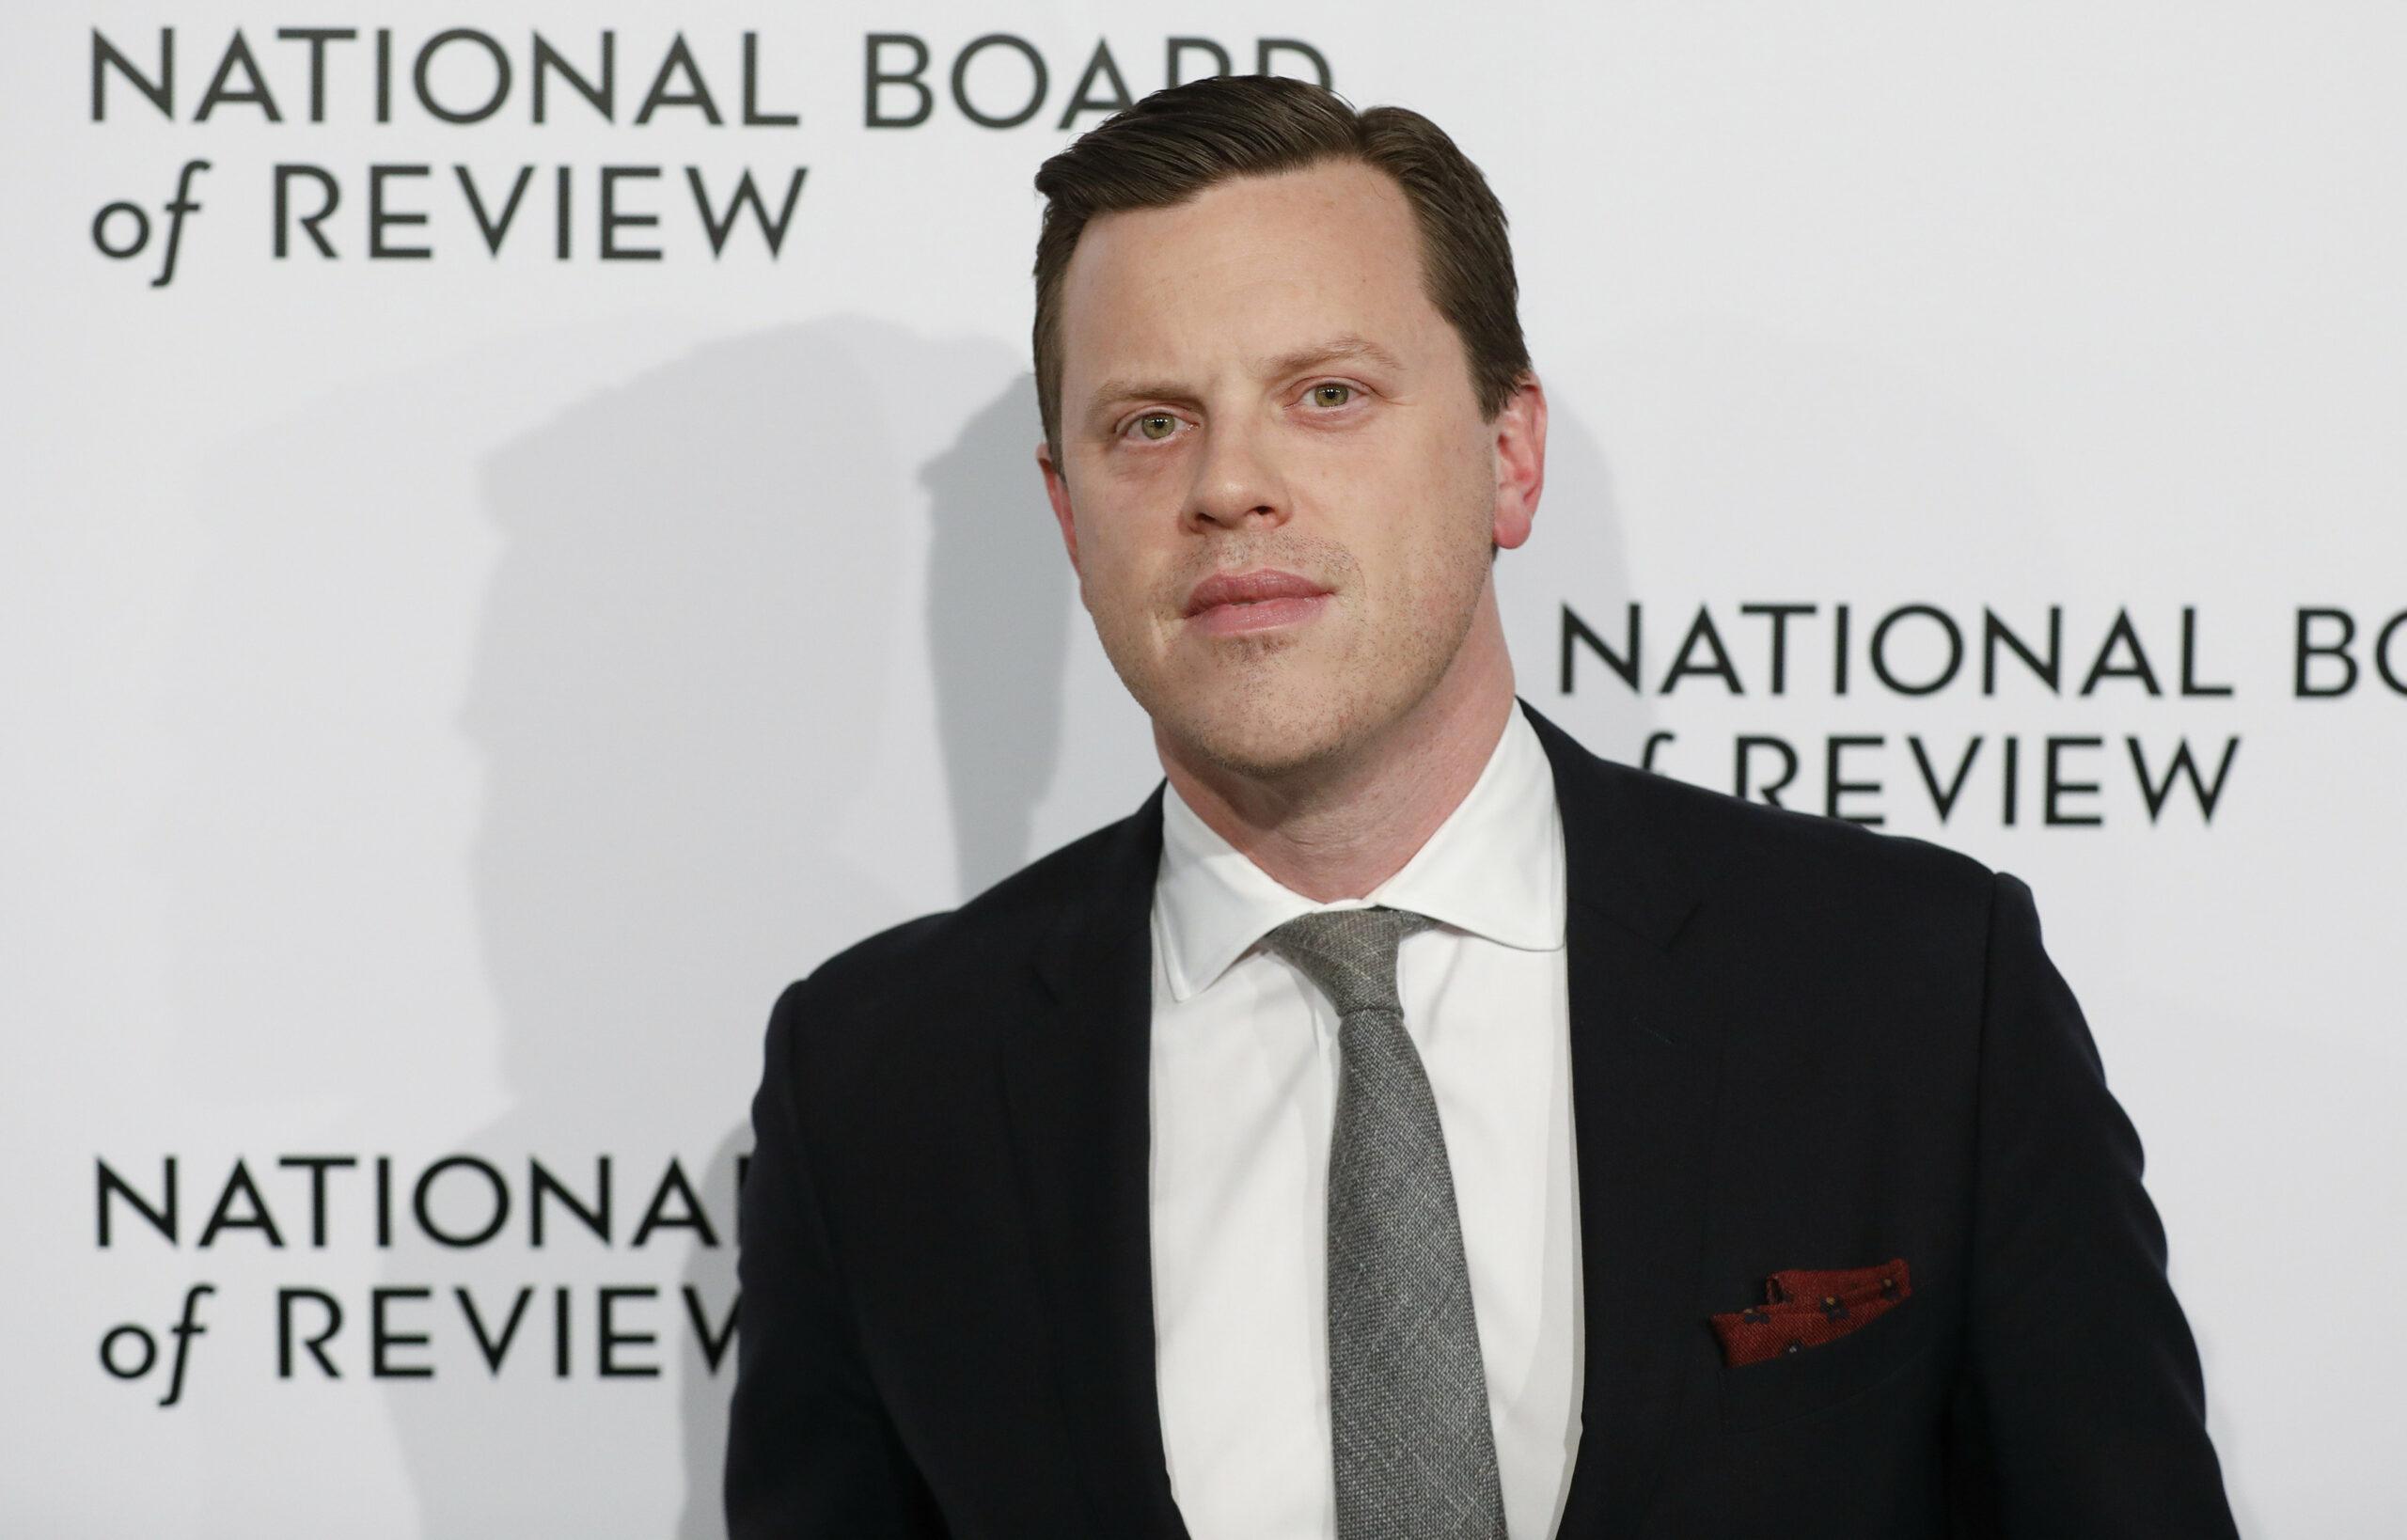 Willie Geist arrives at The National Board of Review in New York